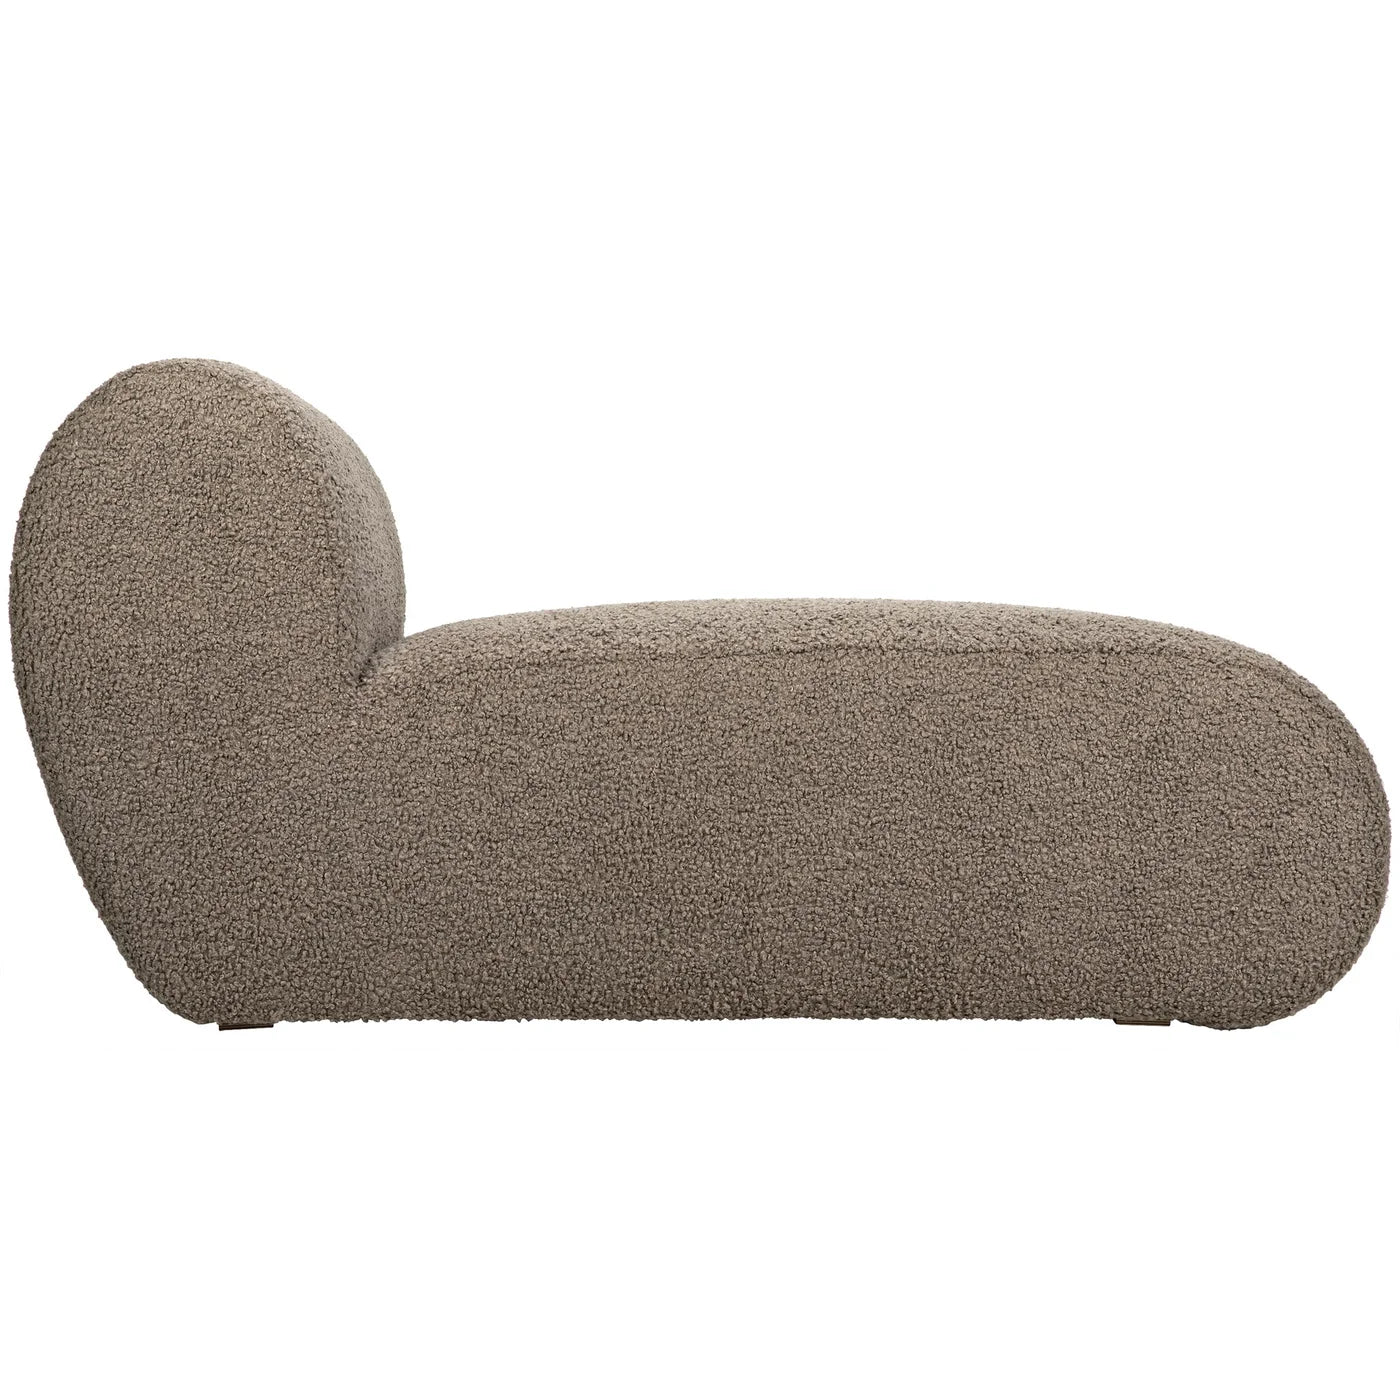 Mallow Chaise-Lounge